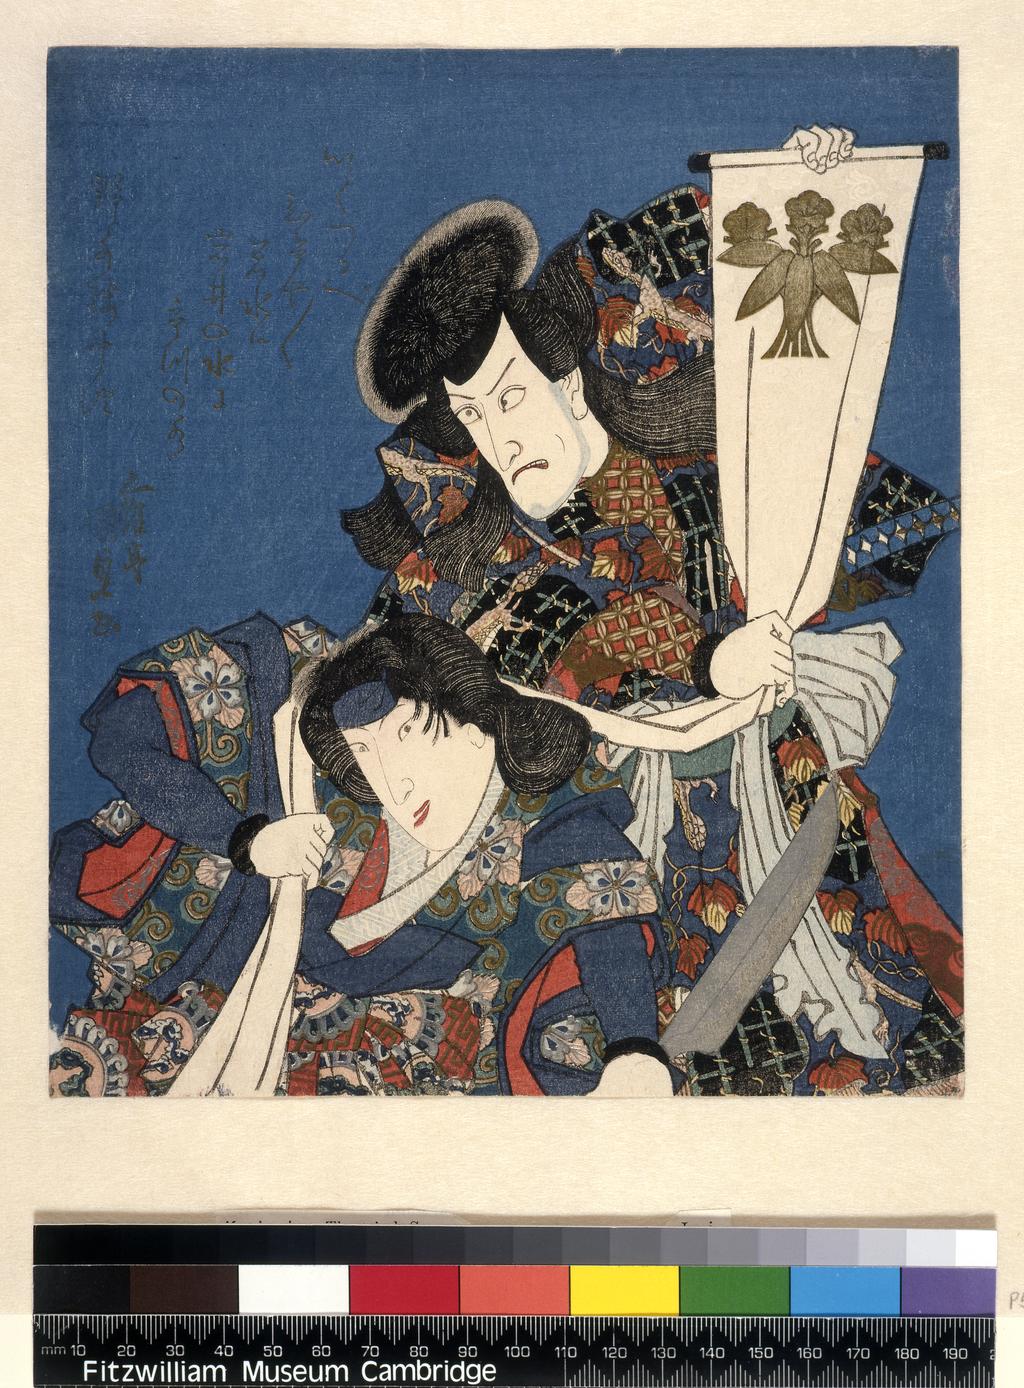 An image of Ichikawa Danjûrô VII as Kibazô and Iwai Shijaku I as Shirotae in Sakigake Genji no kiba-musha performed at the Kawarazaki theatre in 11/1828. Kunisada, Utagawa (Japanese, 1786-1865). Surimono. Colour print from woodblocks, with metallic pigment, blind embossing (karazuri) and mica flecking the blue background. Shikishiban. Signed: Gototei Kunisada ga. Ukiyo-e. Notes: One of many plays based on the Gempei seisuiki (Account of the Gempei wars) and Heike monogatari (Tales of the Heike), involving incidents from the wars between the Heike and Genji clans in the 12th century. Kibazô (in reality Aku-genda Yoshihira) holds a white banner with the sasa-rindô crest of the Genji (Minamoto) clan, the end of which is draped over his wife Shirotae. Such plays with mimed scenes (dammari) played in the dark with pairs of actors pulling flags were normally played at the kaomise (‘face-showing’) productions at the beginning of the season. Iwai Shijaku, his father Iwai Hanshirô V, and his brother Iwai Kumesaburô II, were (along with Segawa Kikunojô V) the leading onnagata of the Bunka-Bunsei eras (1804-30). The kyôka verse embossed in bronze in the blue background playfully refers to the New Year custom of scooping fresh water (wakamizu), while punning on the literal meanings of the family names of the actors: Iwai (‘mountain spring’) and Ichikawa (‘stream through the marketplace’).